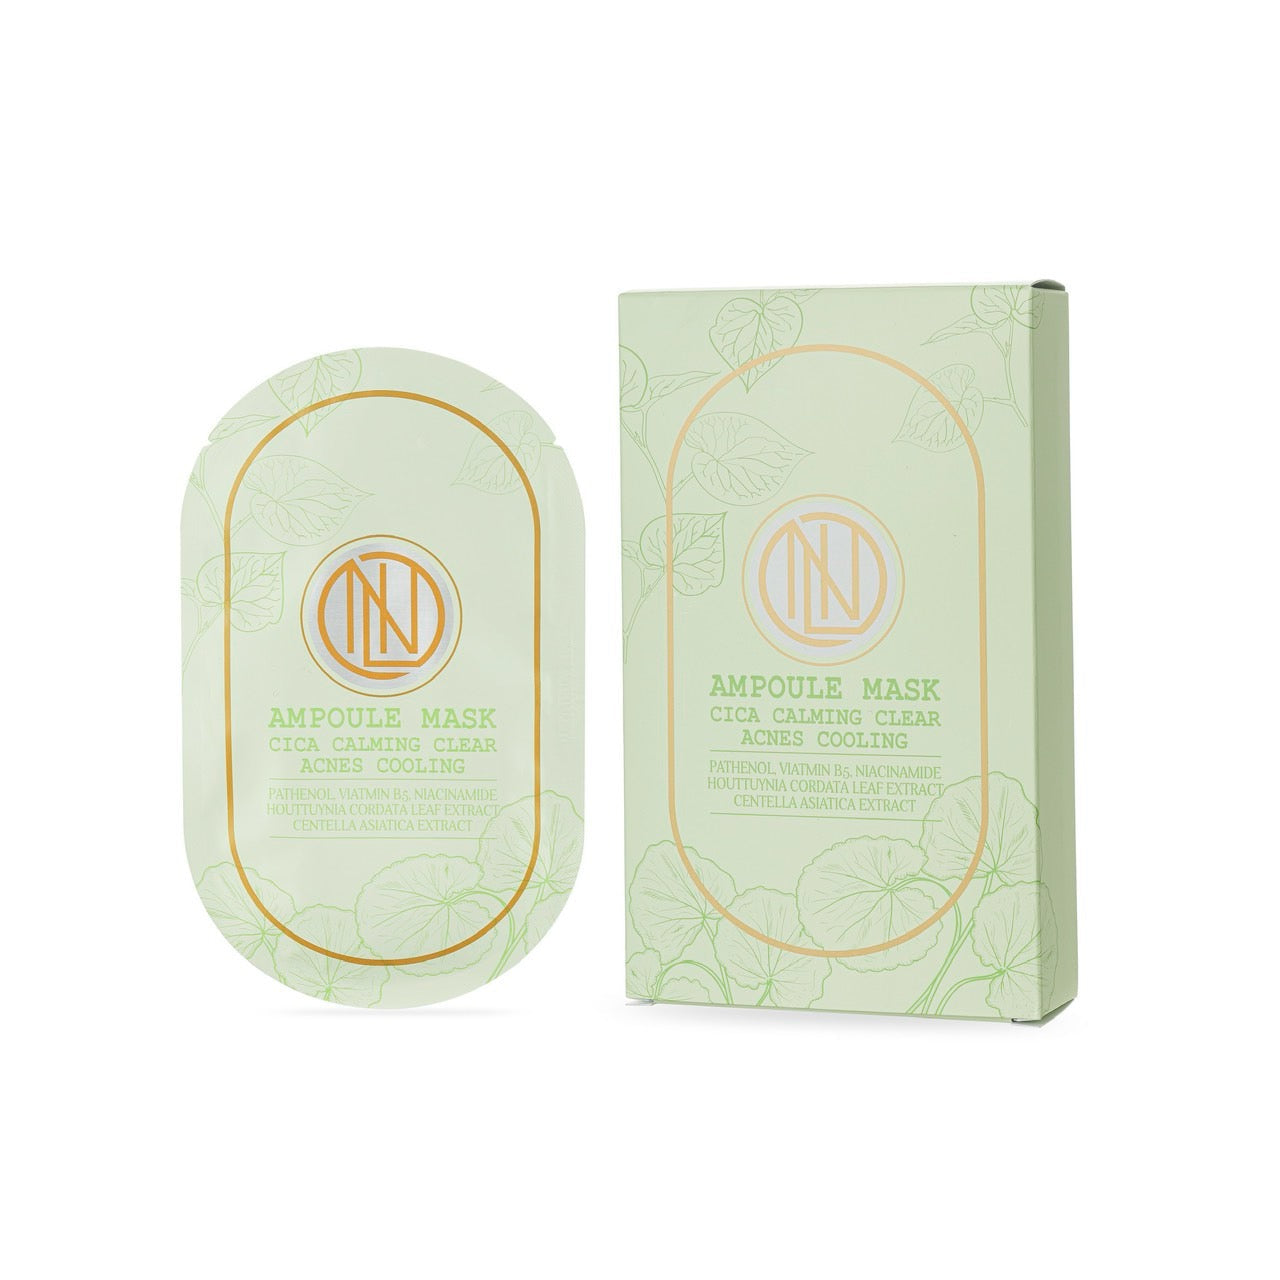 Ampoule Mask - Cica Calming Clear Acne's Cooling (Cica)